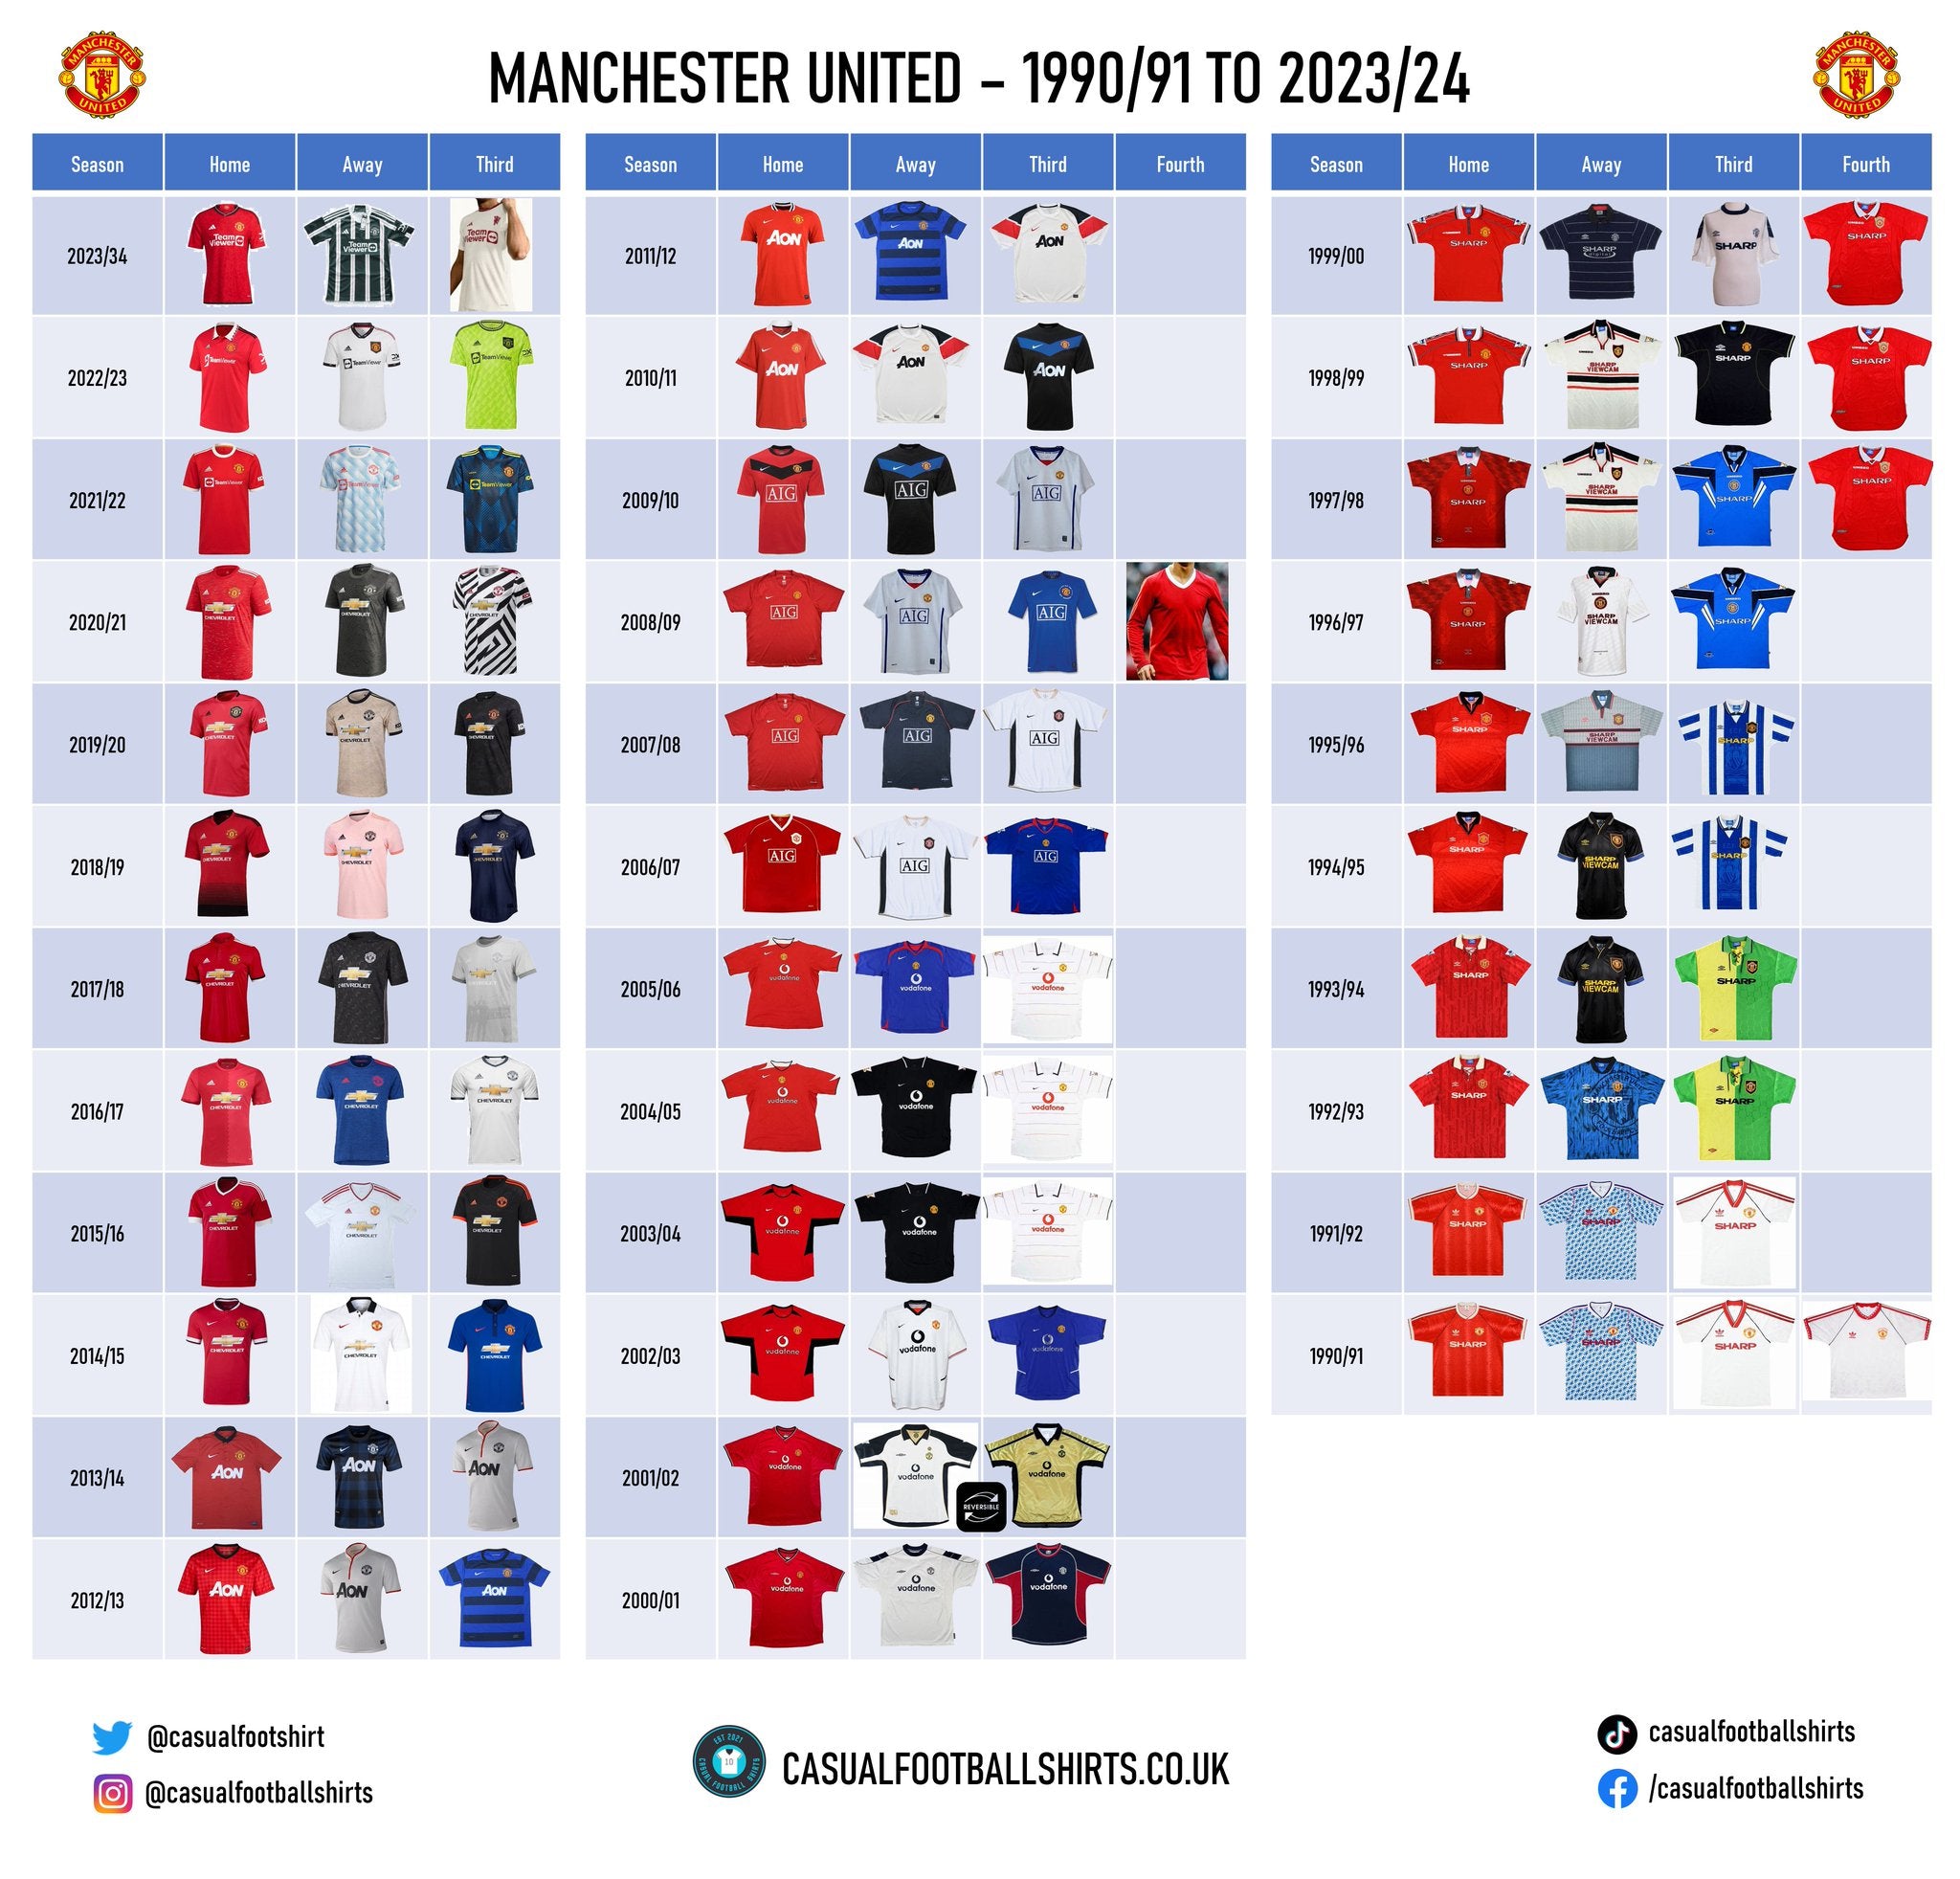 Manchester United Home Kits over the years